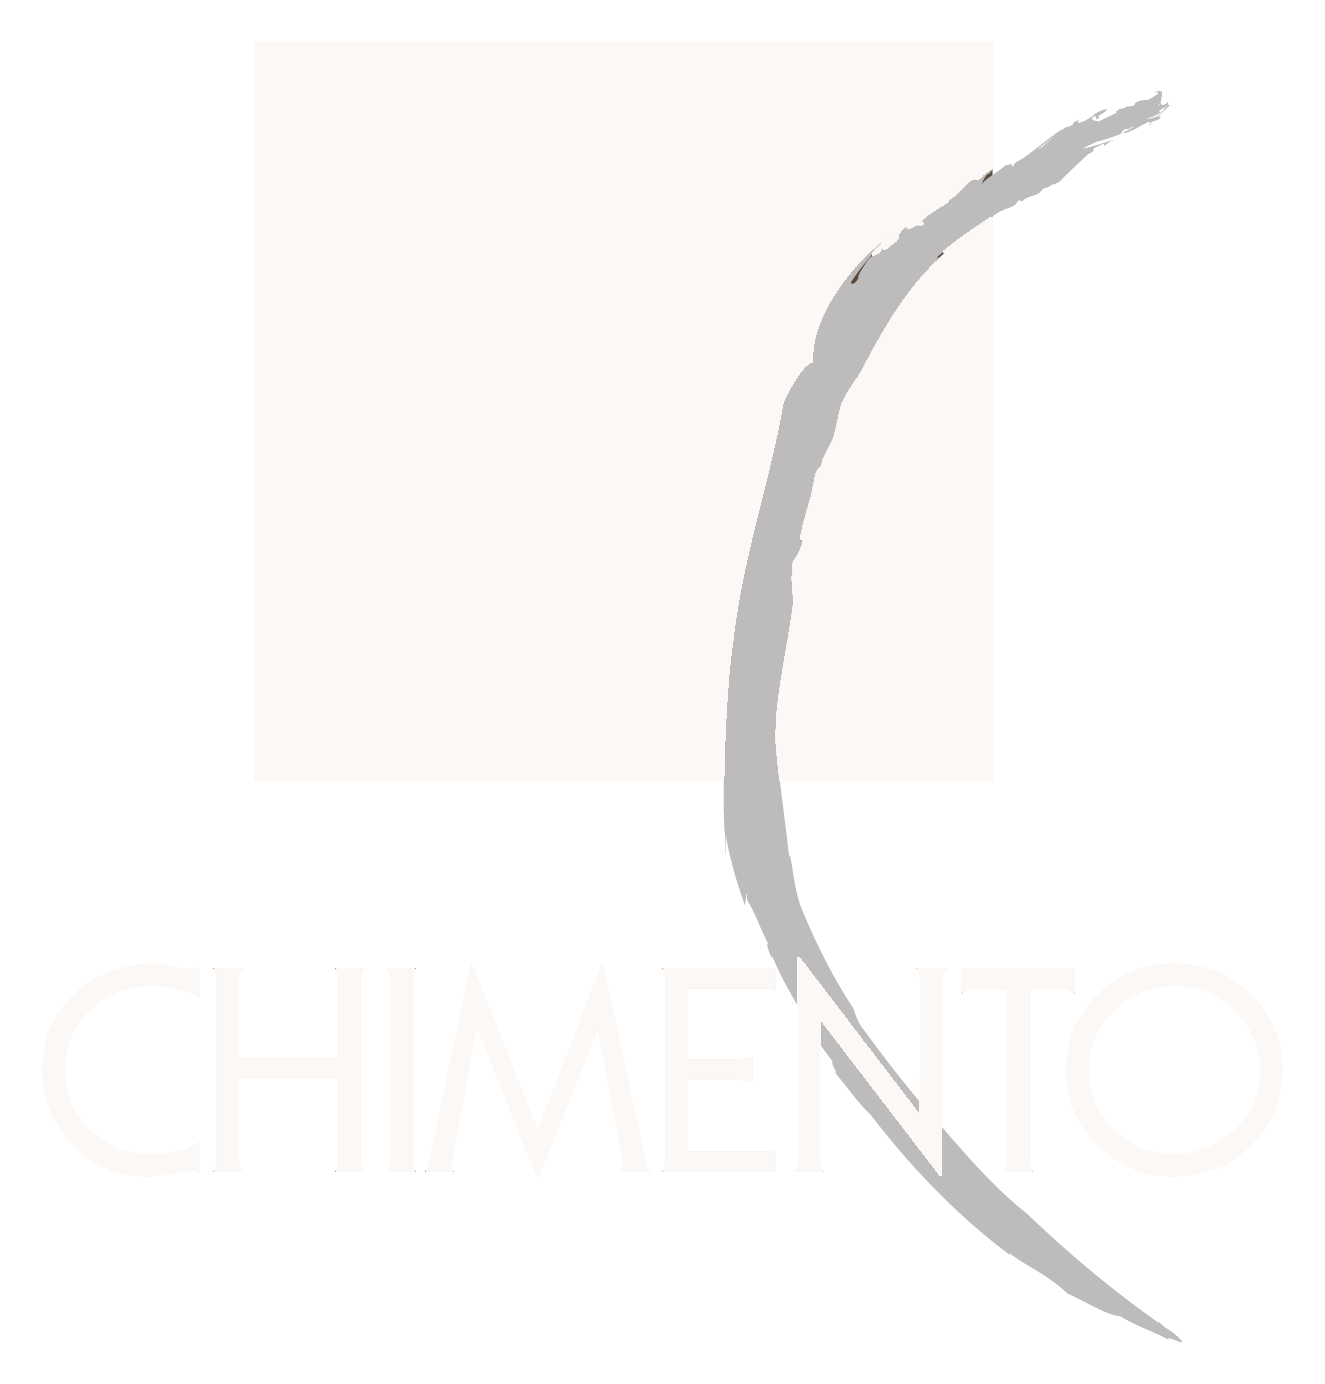 CANTINECHIMENTO